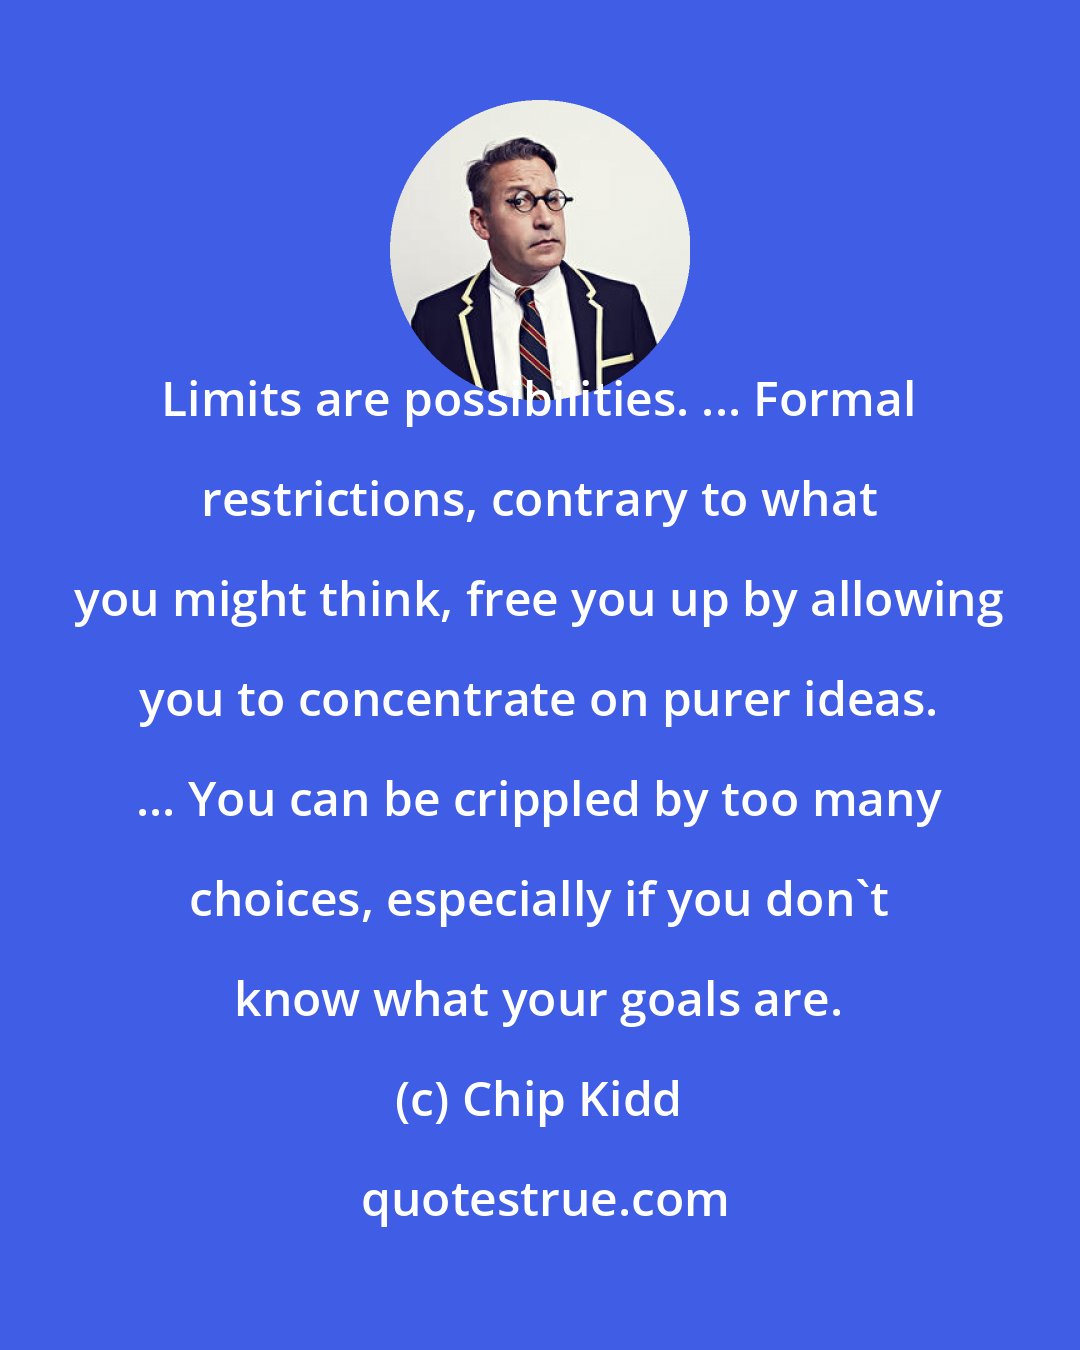 Chip Kidd: Limits are possibilities. ... Formal restrictions, contrary to what you might think, free you up by allowing you to concentrate on purer ideas. ... You can be crippled by too many choices, especially if you don't know what your goals are.